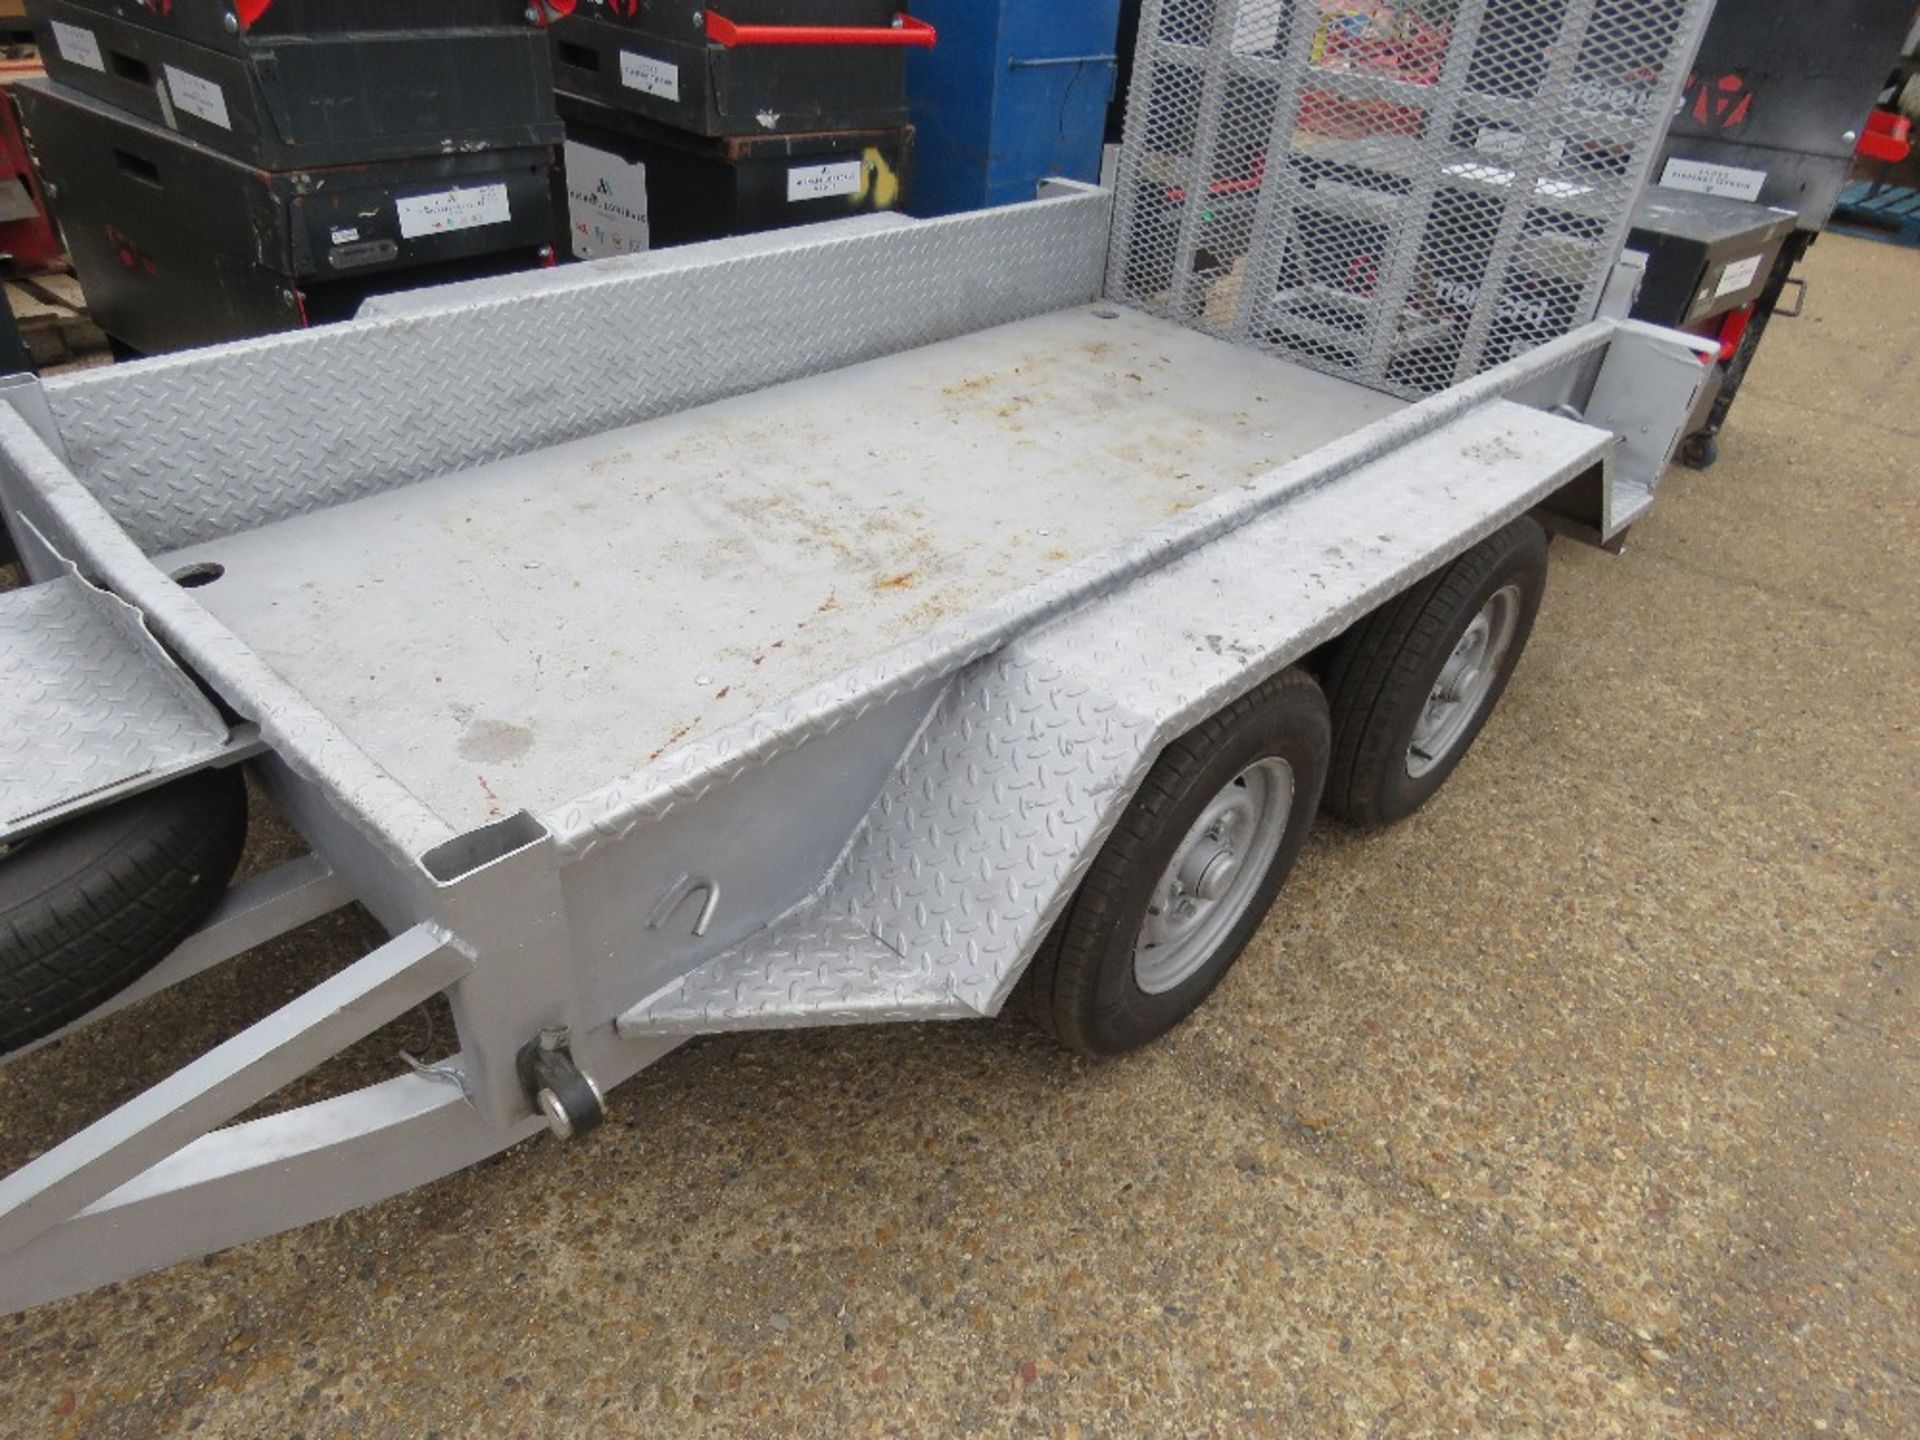 INDESPENSION CHALLENGER MINI DIGGER TRAILER, 2.6TONNE GROSS. 1.27M X 2.5M BED SIZE APPROX WITH DROP - Image 4 of 6